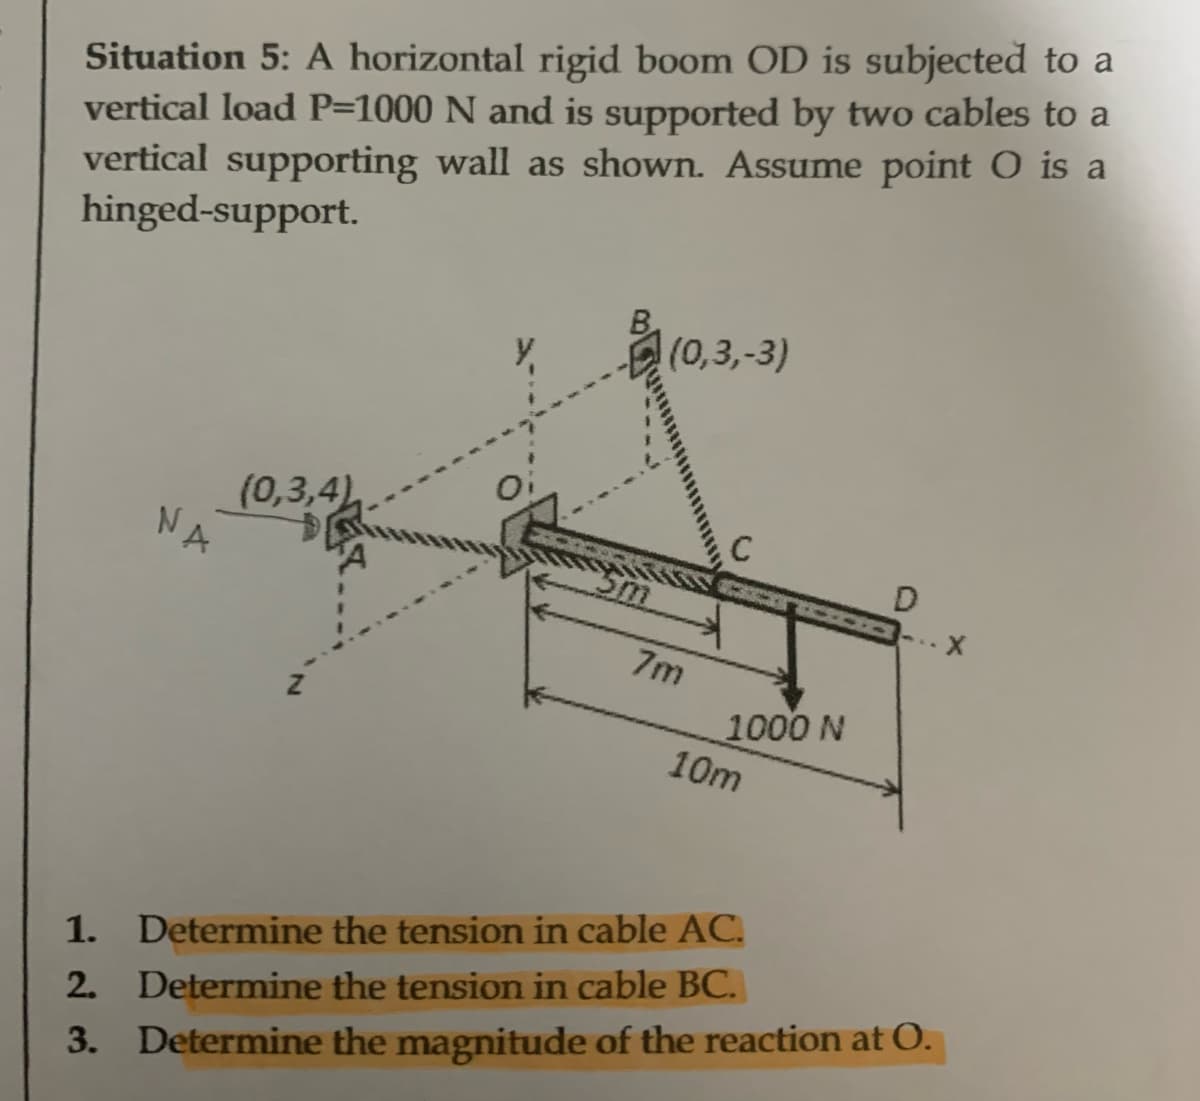 Situation 5: A horizontal rigid boom OD is subjected to a
vertical load P=1000 N and is supported by two cables to a
vertical supporting wall as shown. Assume point O is a
hinged-support.
NA
(0,3,4)
(0,3,-3)
7m
C
1000 N
10m
D
1. Determine the tension in cable AC.
2.
Determine the tension in cable BC.
3. Determine the magnitude of the reaction at O.